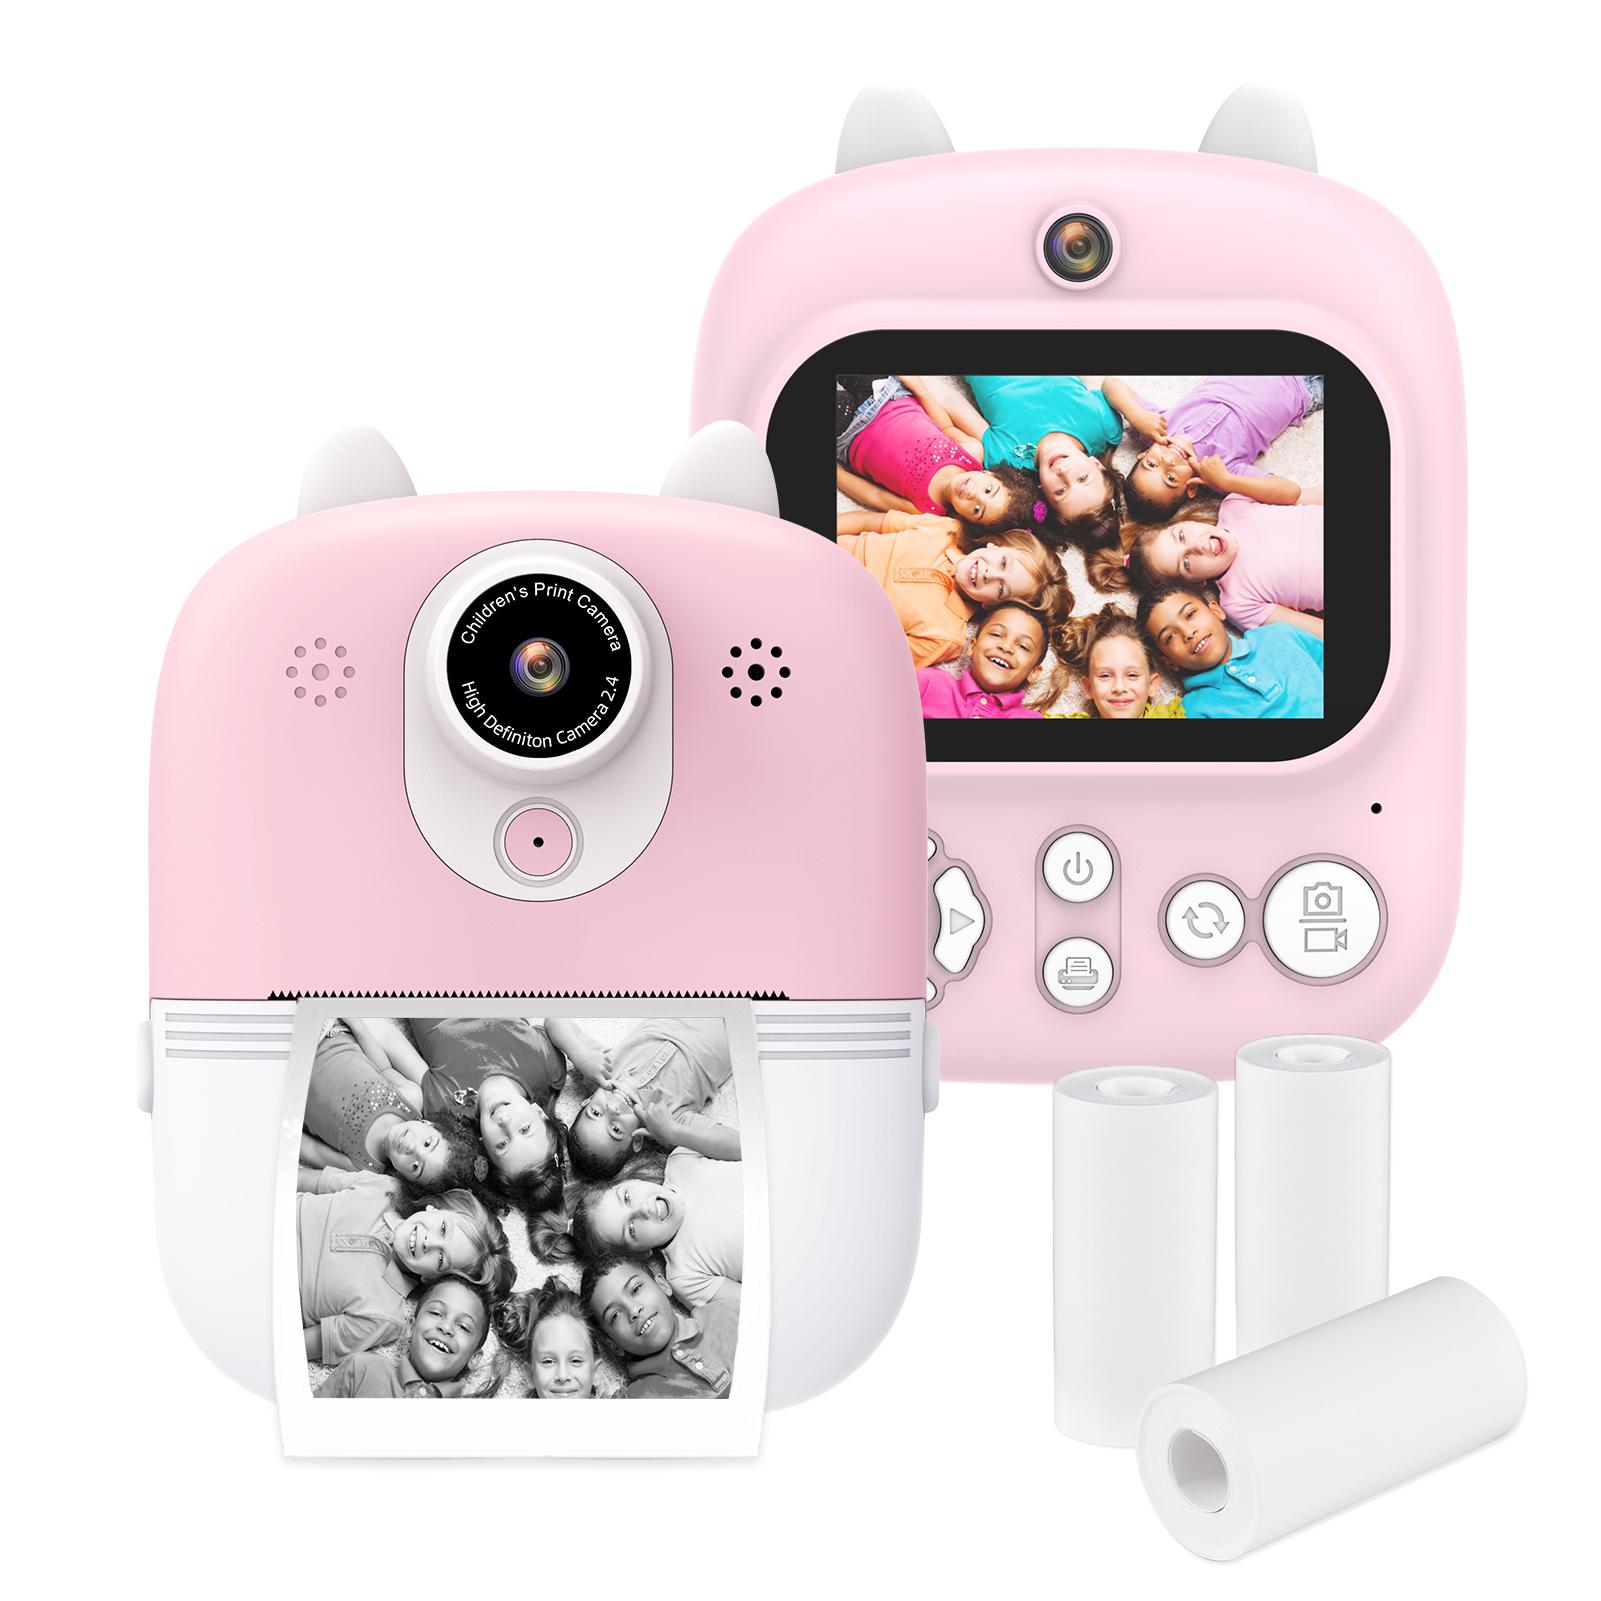 Stone Tec Multifunctional 3-in-1 Instant Print Camera Dual Front and Rear Cameras 1200W Pixels